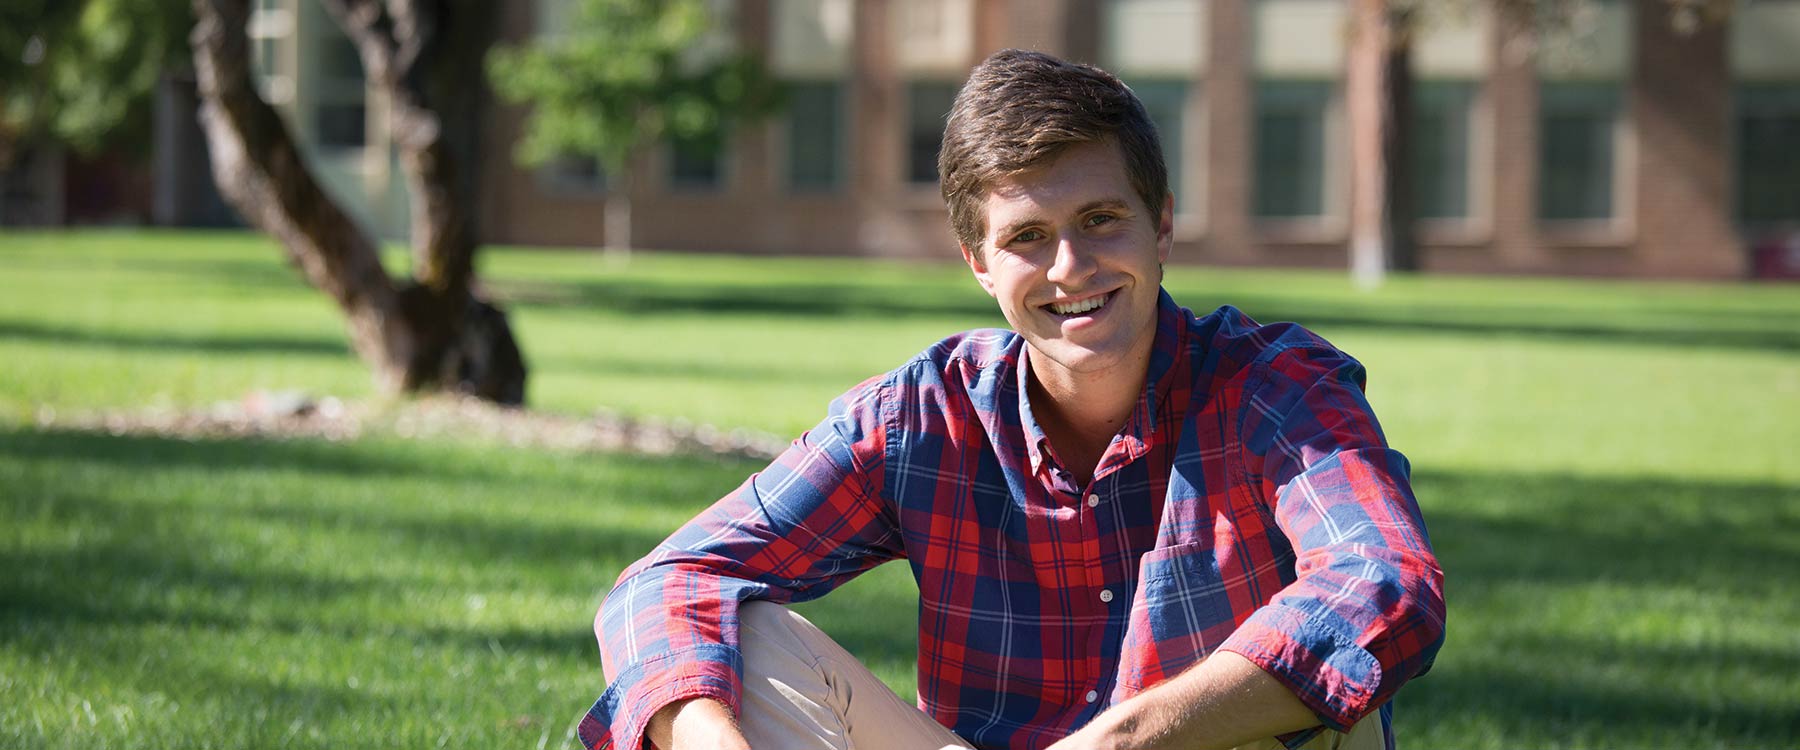 Micah sits on the grass in the middle of campus. He is posed, smiling for the camera.